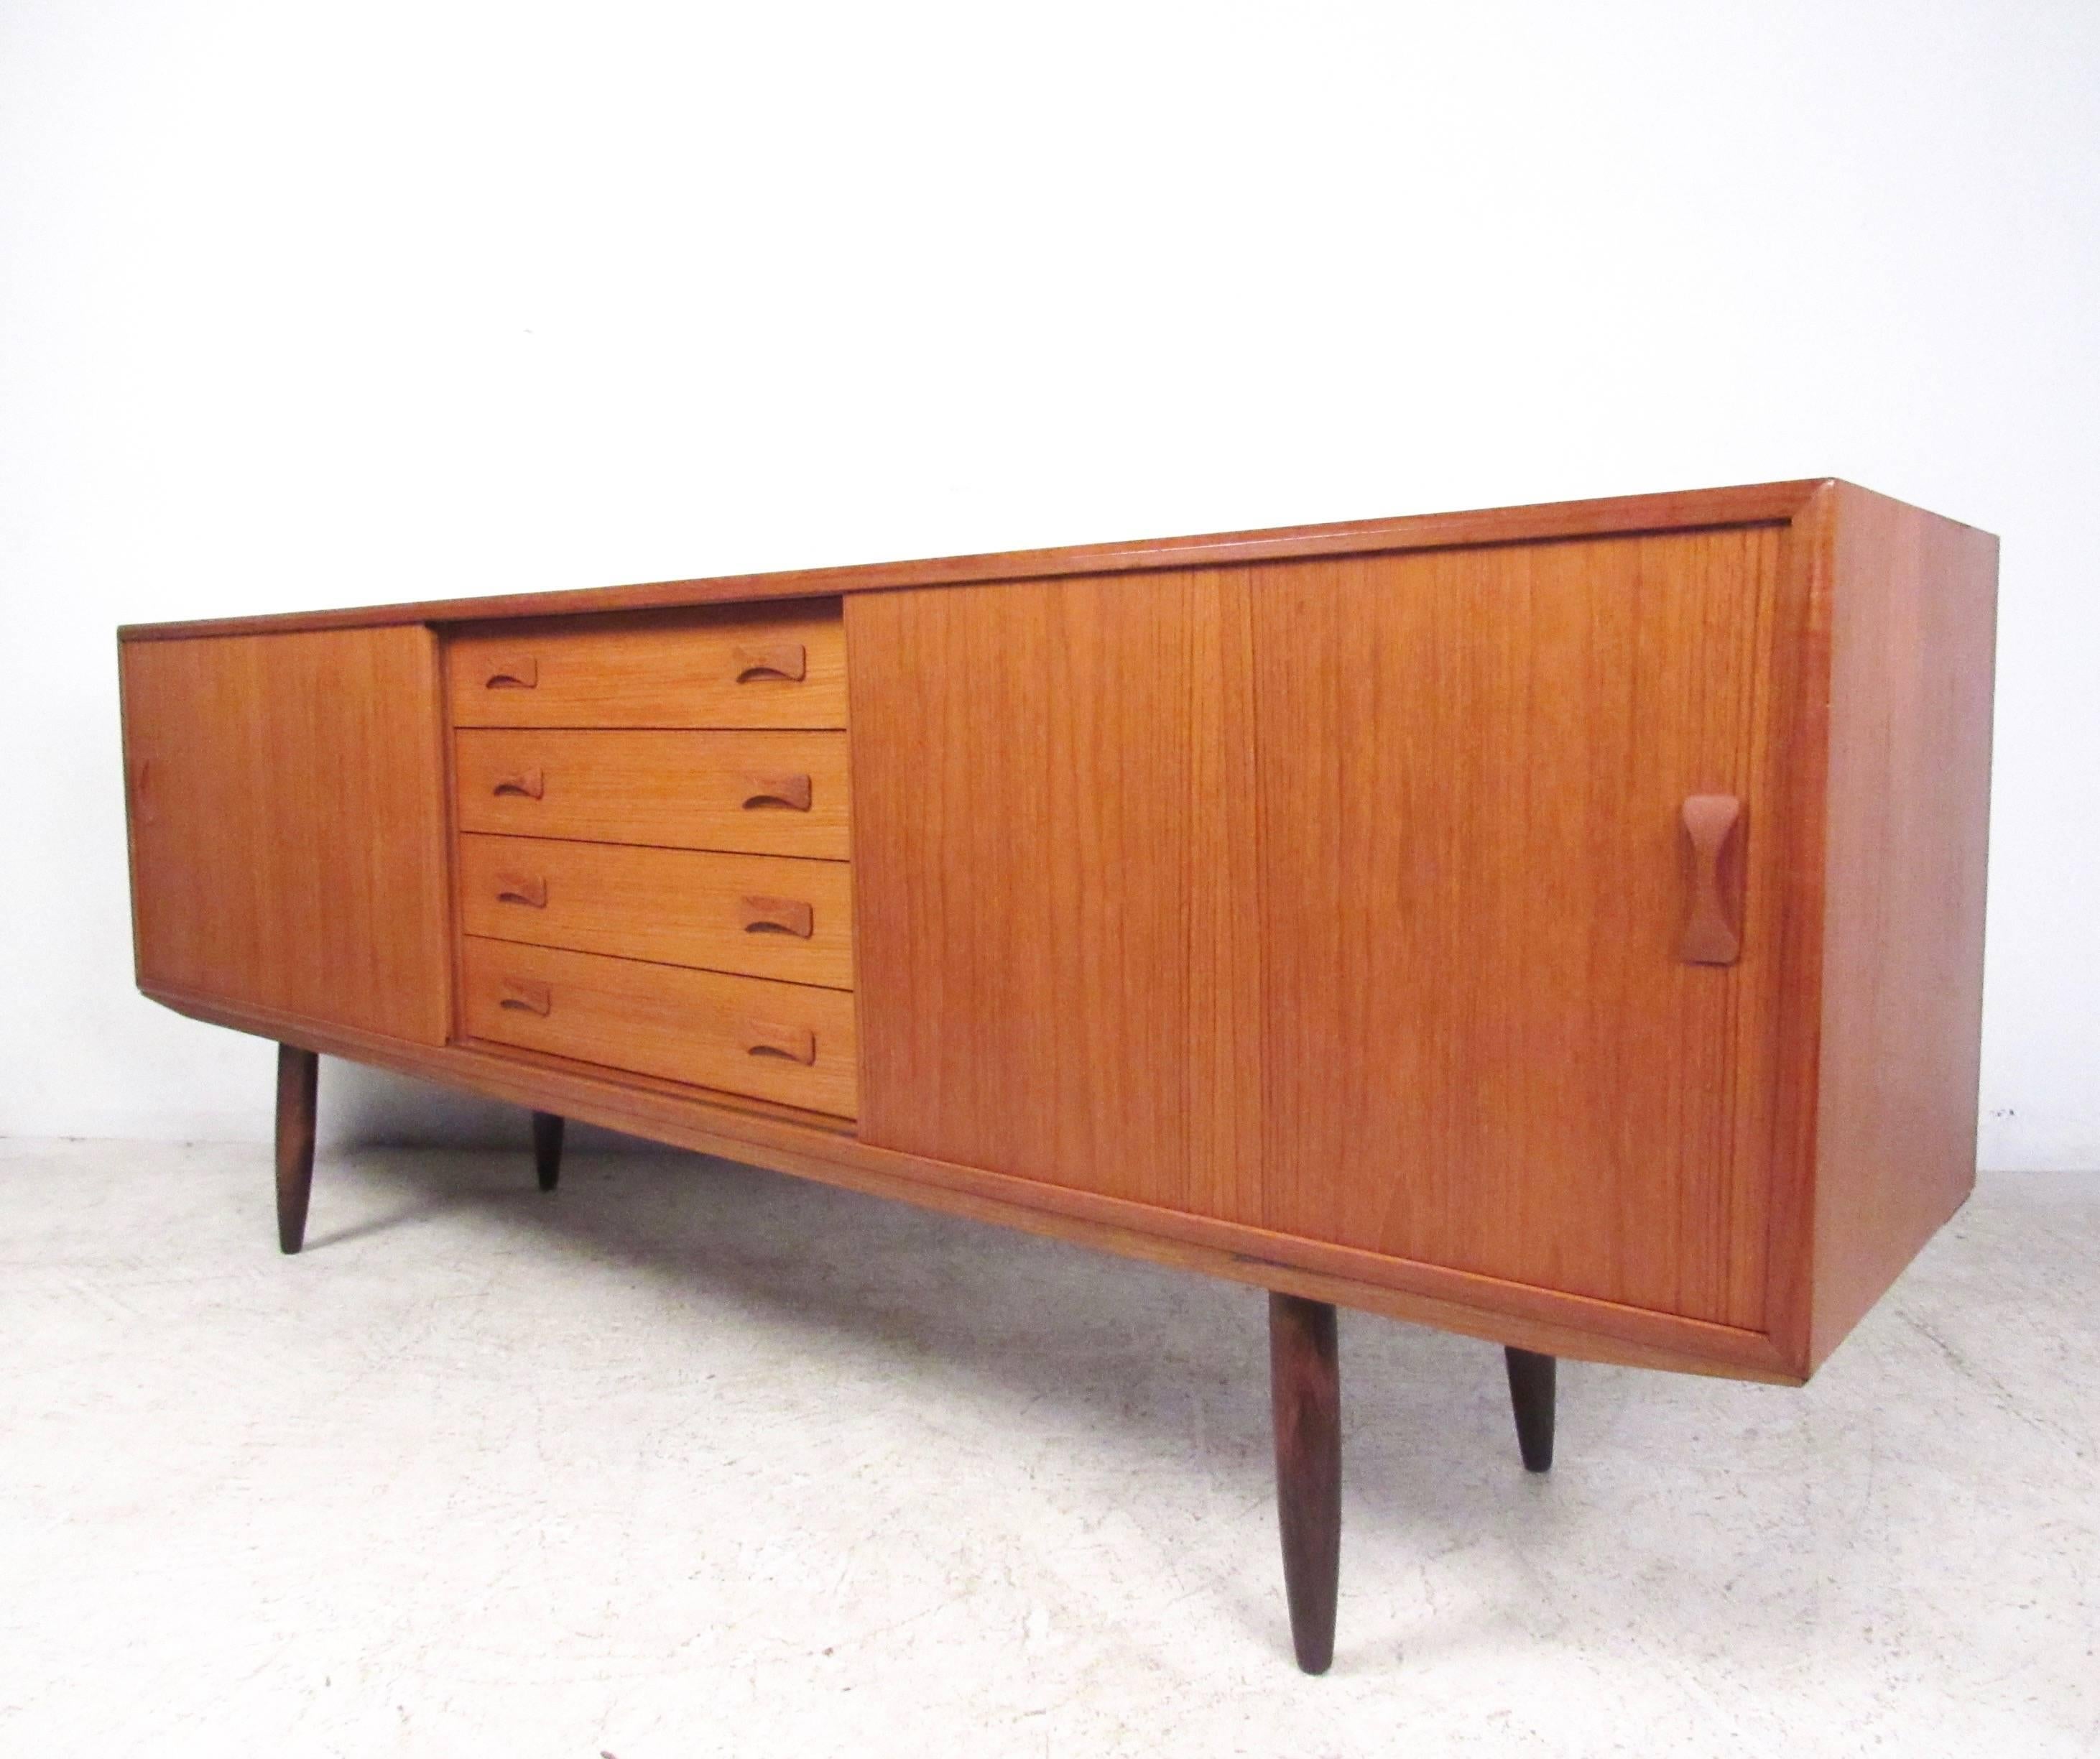 This stylish teak sideboard features quality mid-century construction including dovetail drawers, carved pulls, and rich teak finish. Tapered legs and spacious storage cabinets add to the Scandinavian modern charm of the piece, which makes an